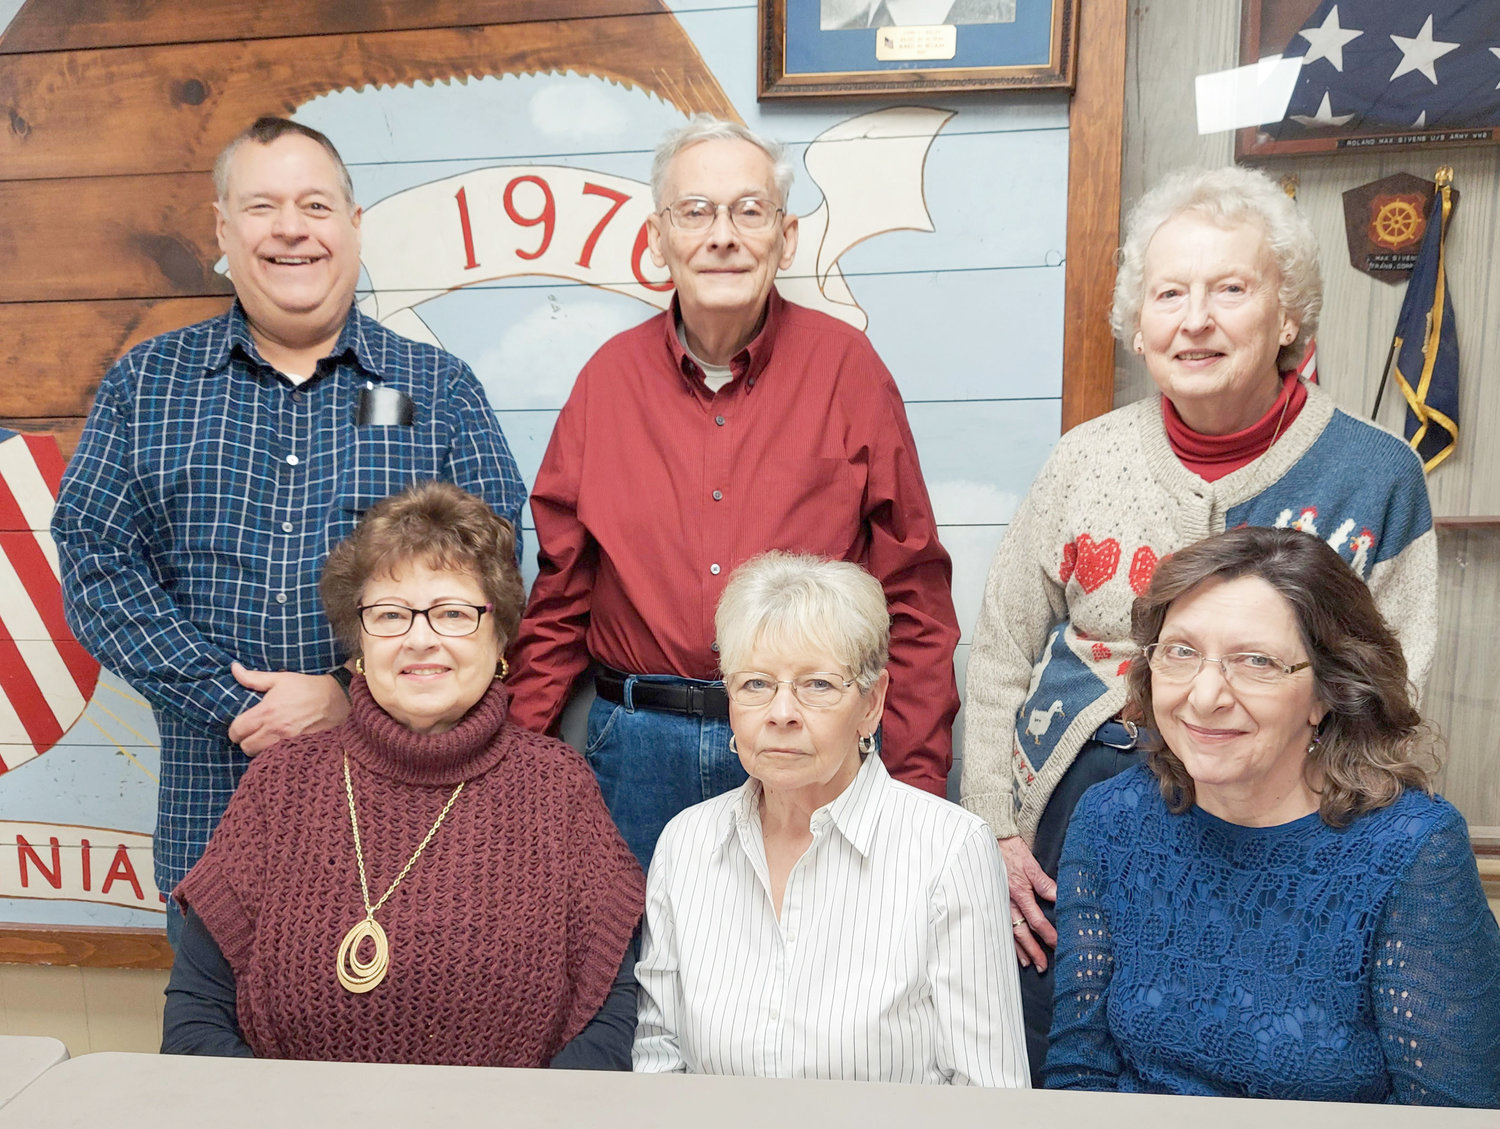 The Oriska Valley Seniors have announced the organization’s officers for 2023. They are: Doug Lopesz, president; Bethany Winner, vice president; Suzette Hayward, secretary; Mike Silliman, treasurer; Mabel Silliman, programs and bus trips coordinator; and Gladys Jaquay, sunshine lady. Meetings are held the first Thursday of each month at the American Legion in Oriskany Falls, with the exception of May 4, Aug. 3 and Dec. 7, which are held offsite. For more information on programs and bus trips, view the website at https://oriskavalleyseniors.weebly.com/.